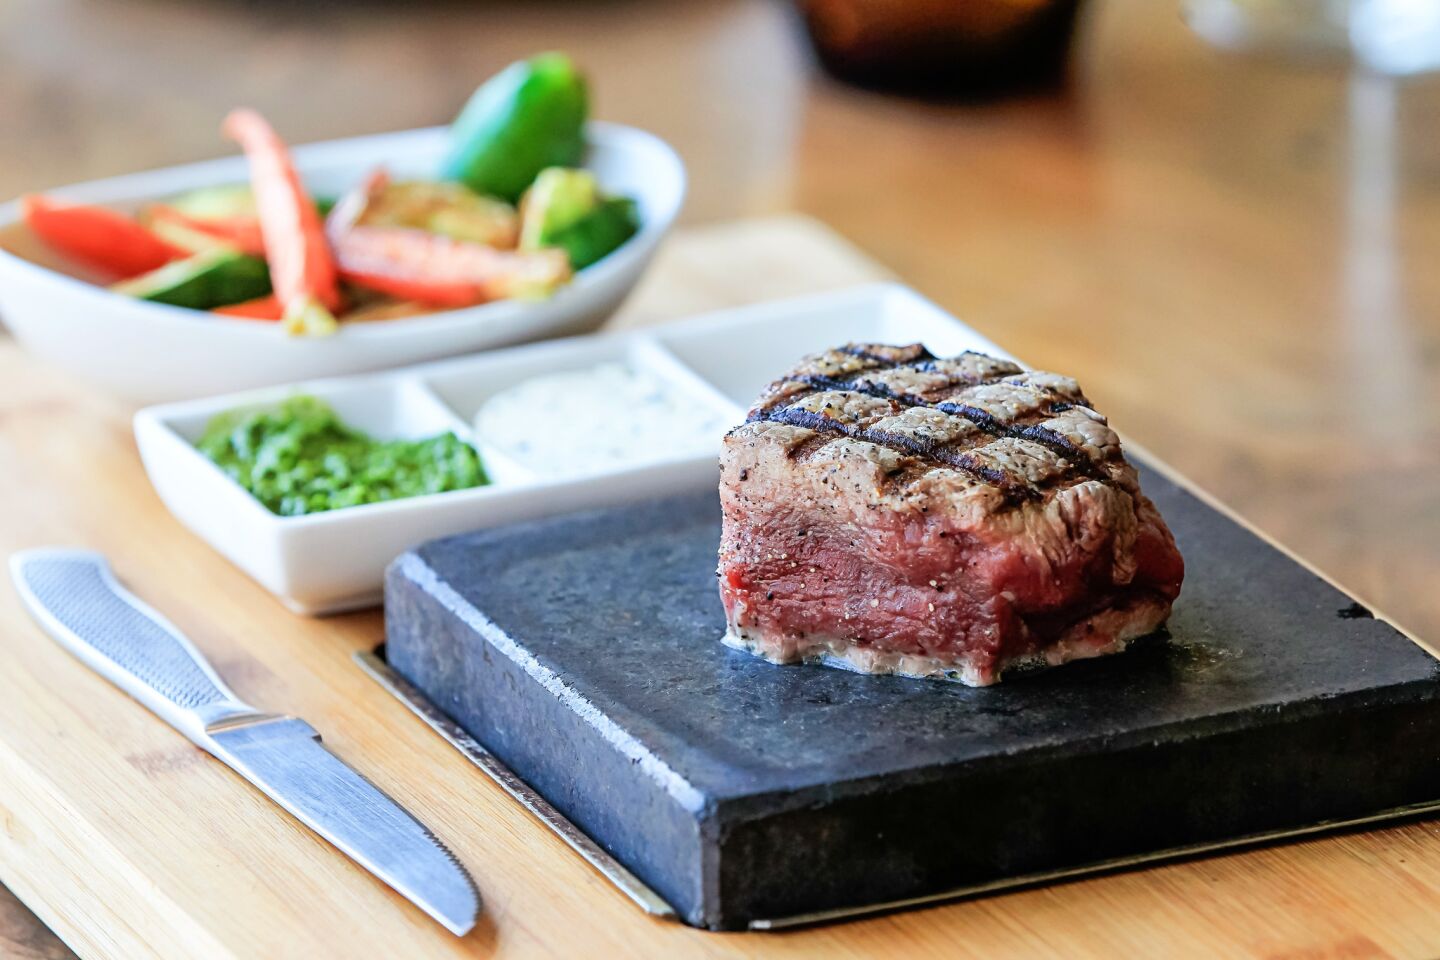 Right at the bottom of the dinner menu, there’s an 8-ounce aged Angus filet mignon. It’s served rare on a hot stone from Australia. Heated to 450 degrees — there’s a special oven to get the stone to that high temperature — the stone allows the diner to cook the steak to his or her liking.